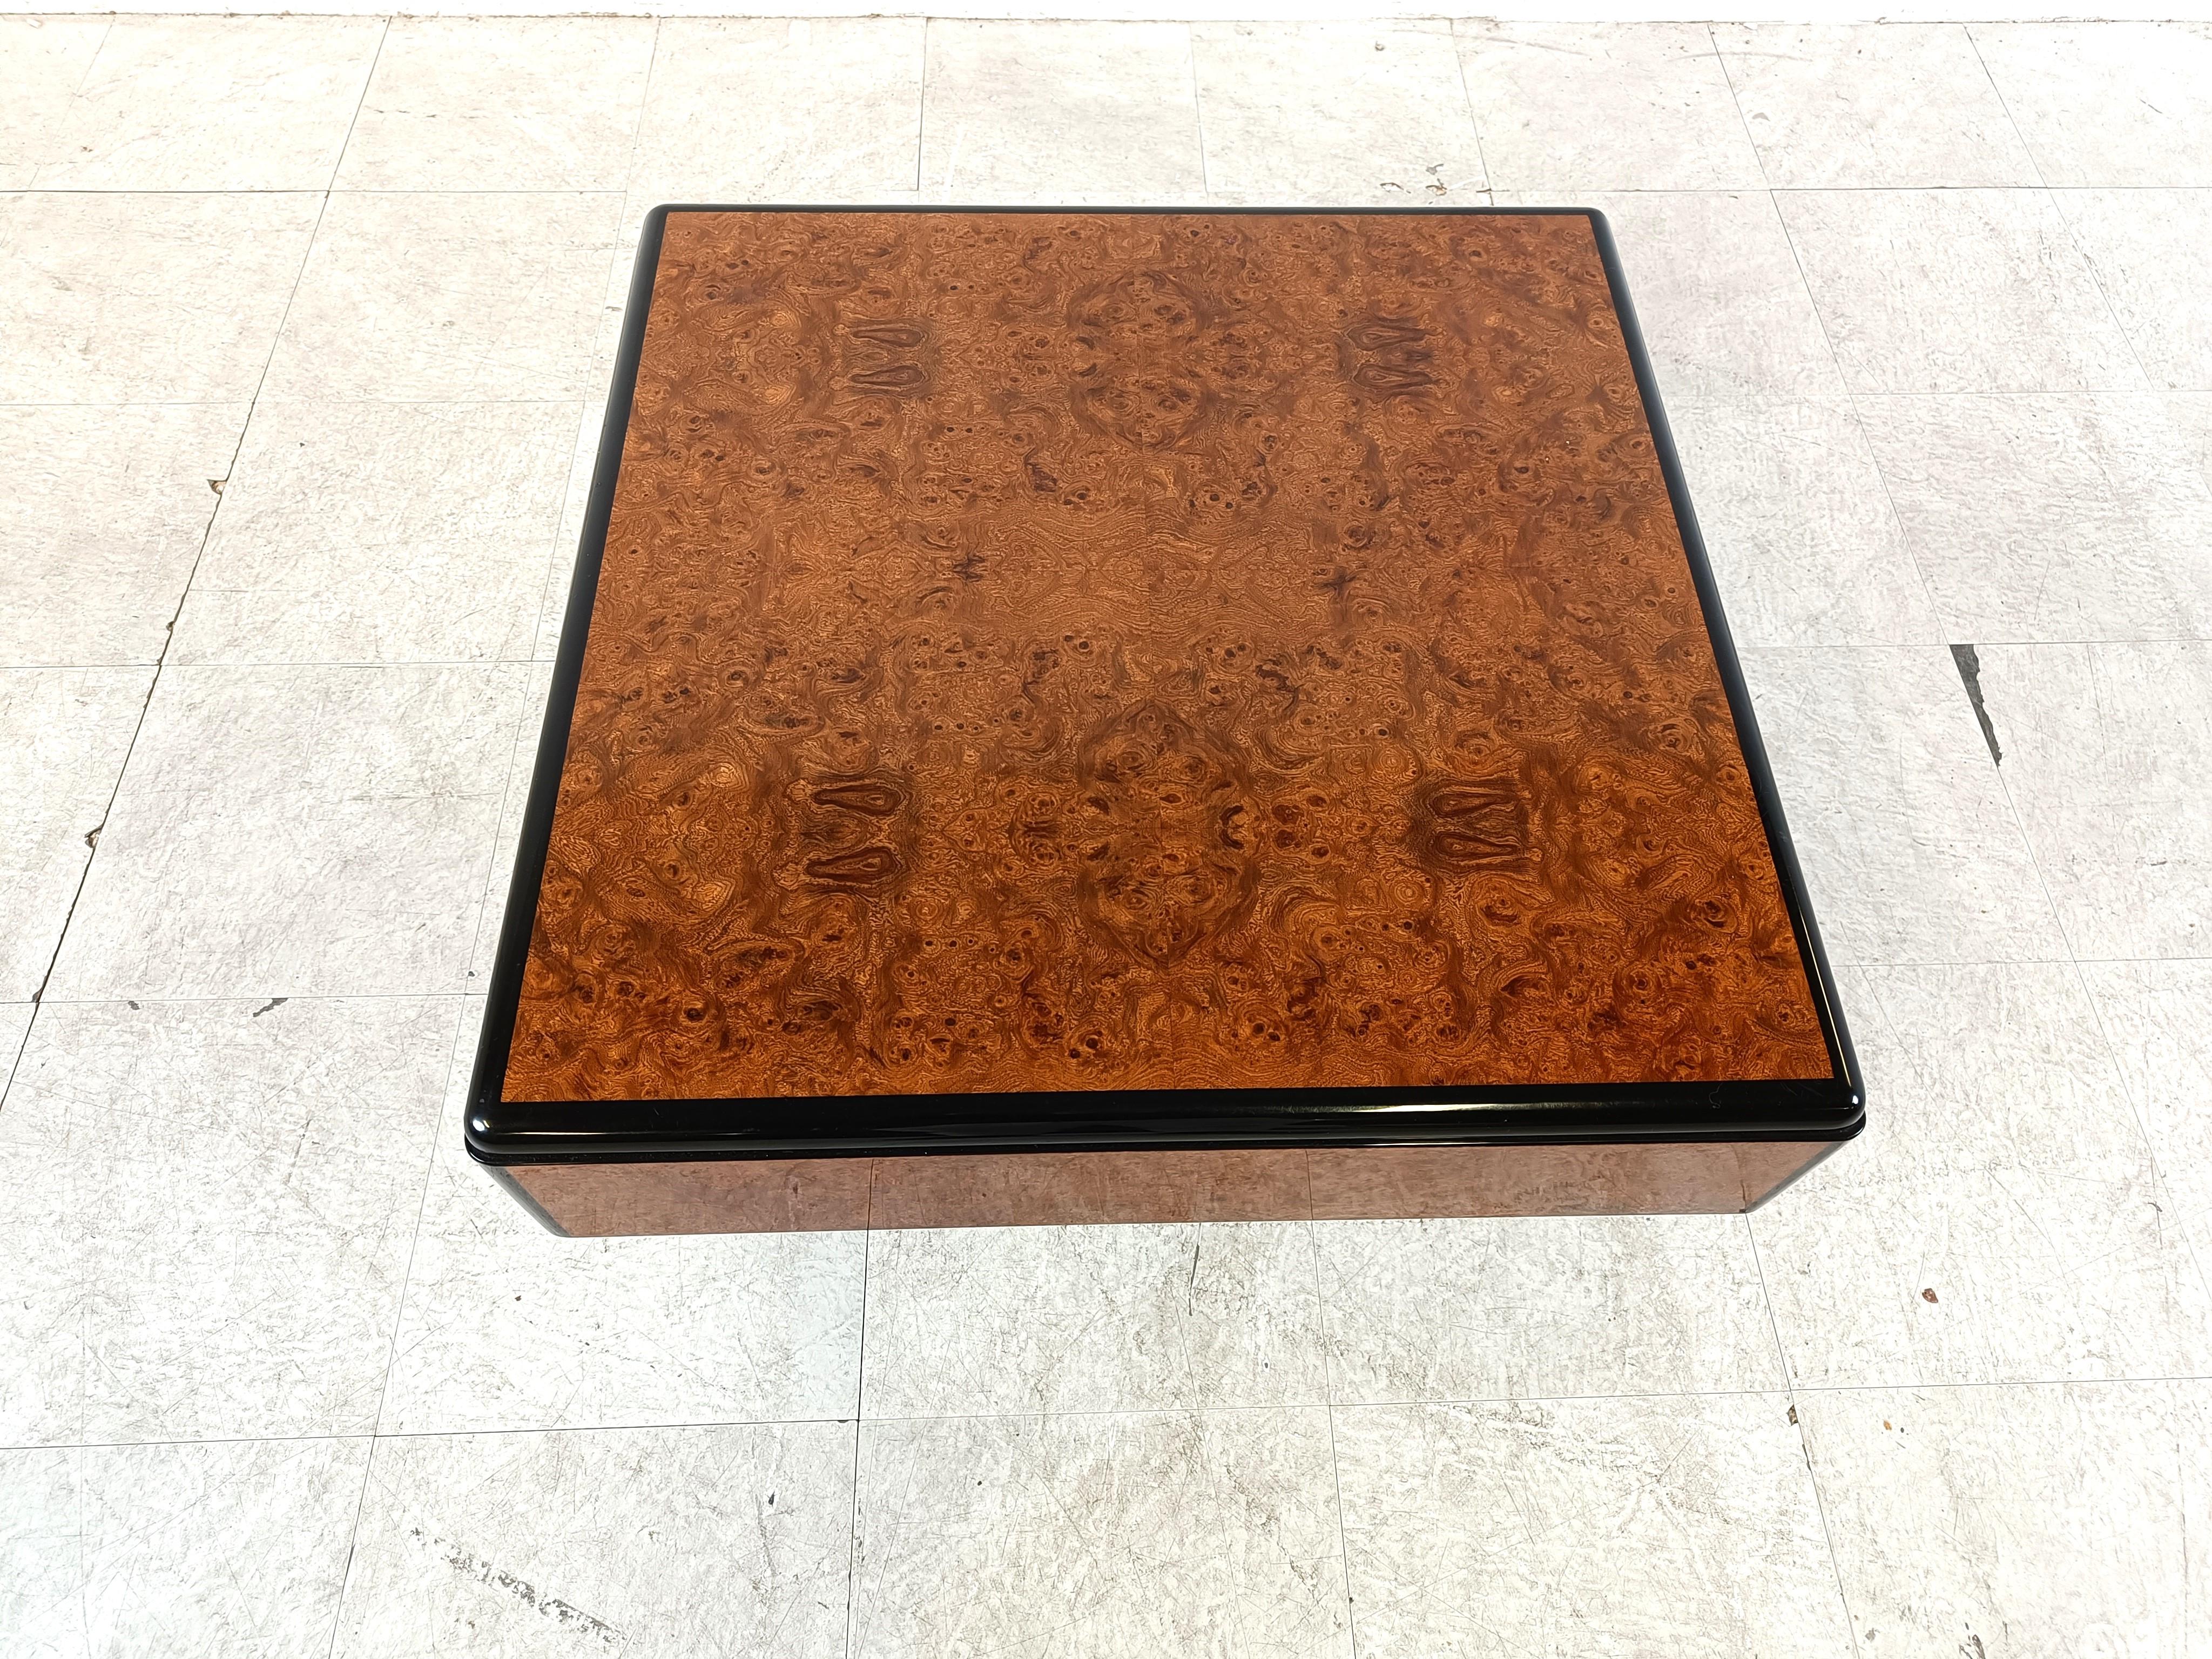 Burl wood coffee table or side table designed by Paul Michel.

Black lacquered wooden base and lacquer edges with burl wood veneer finish.

Luxurious appeal.

Signed on the base.

Good condition. 

1970s - France

Dimensions:
Height: